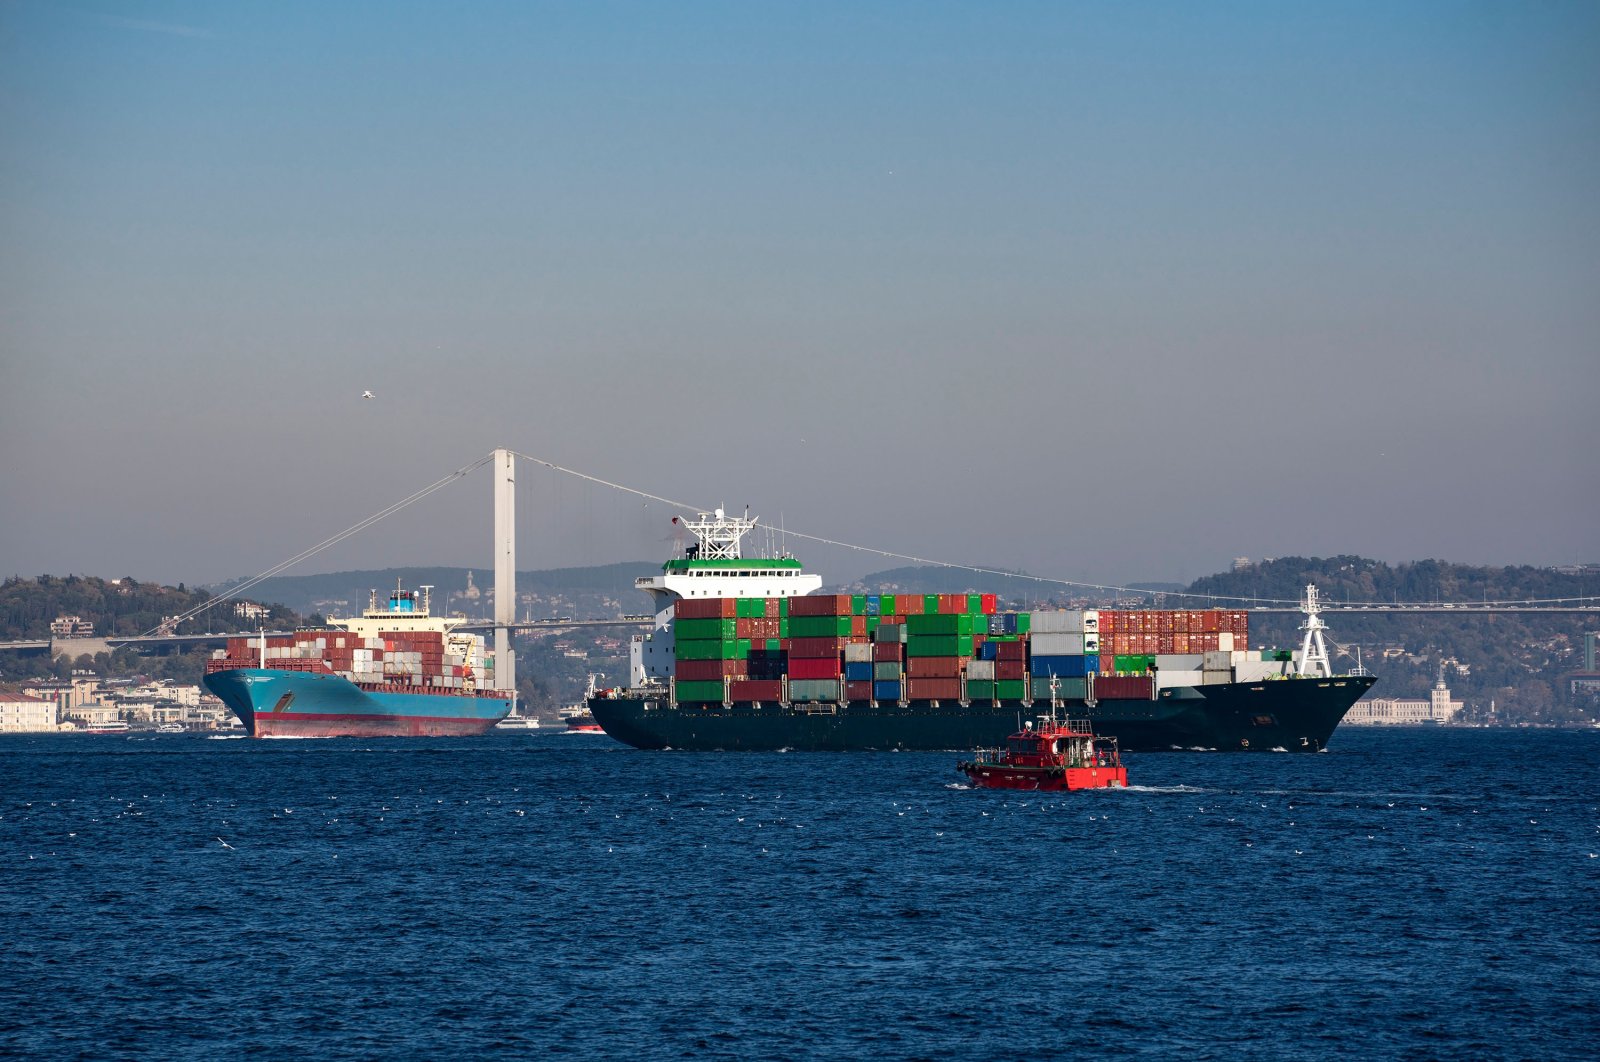 Container ships sail through the Bosporus in Istanbul, Turkey, June 23, 2021. (Shutterstock Photo)